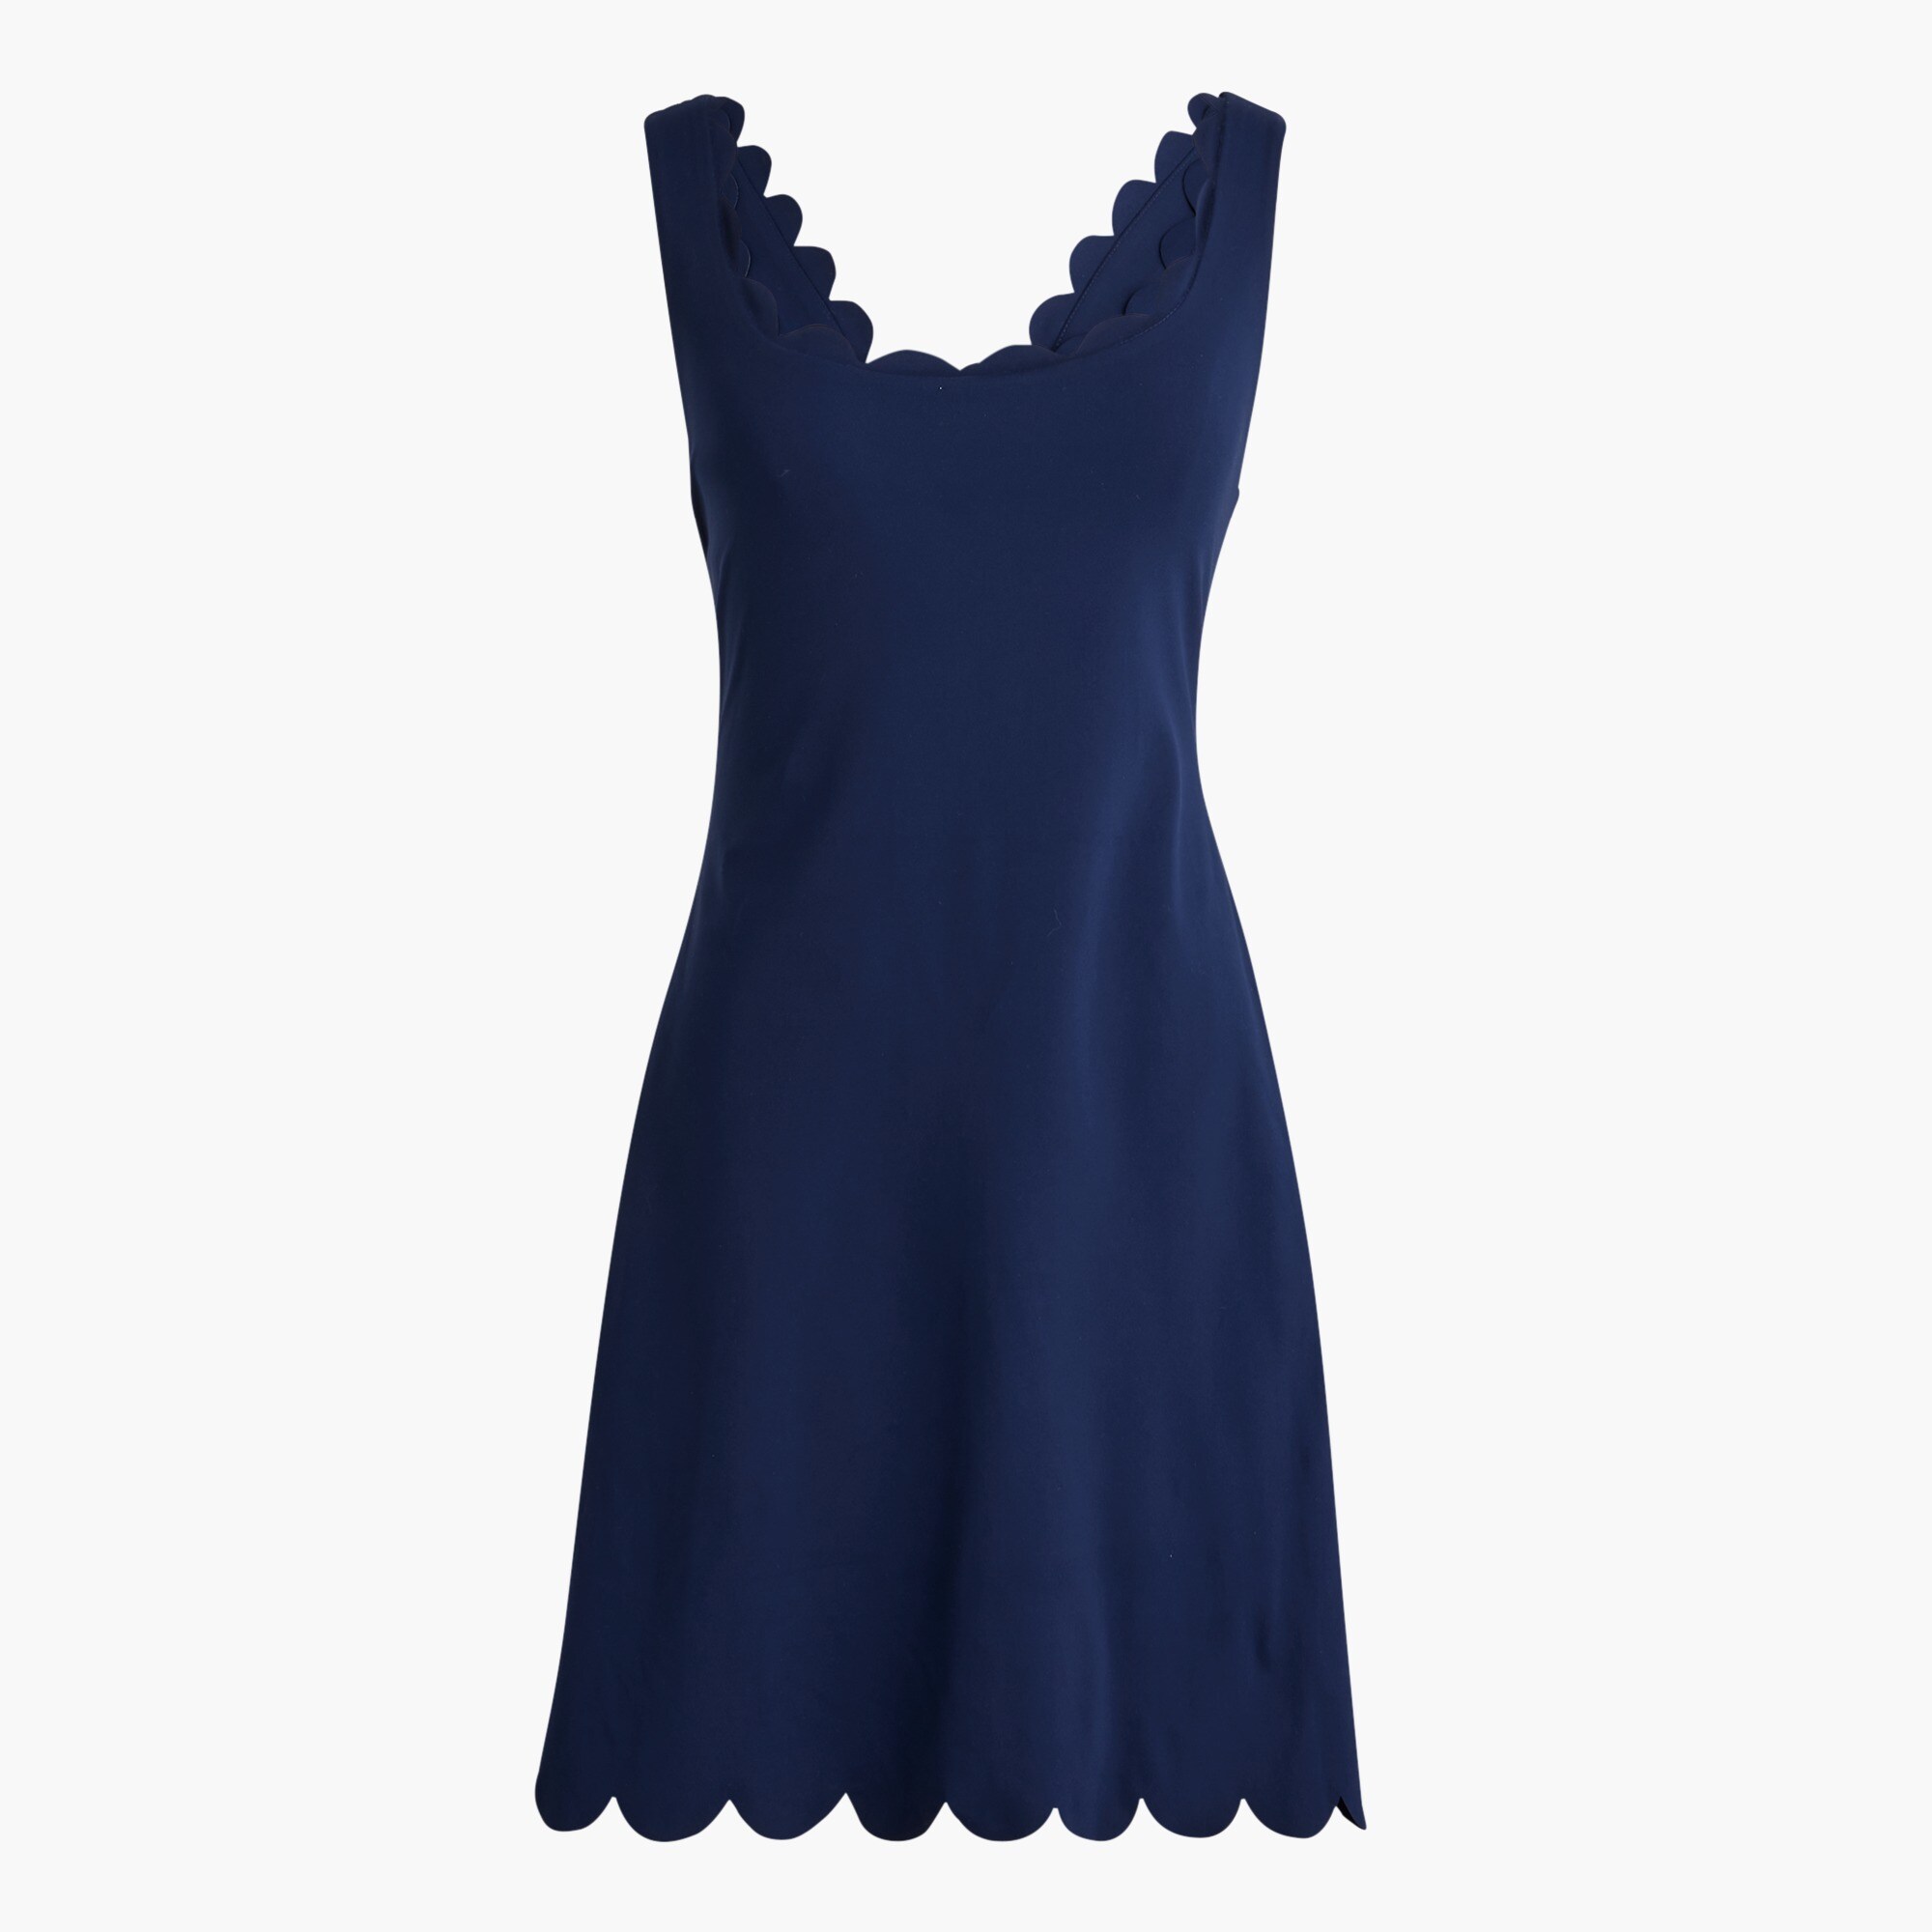  Scalloped active dress